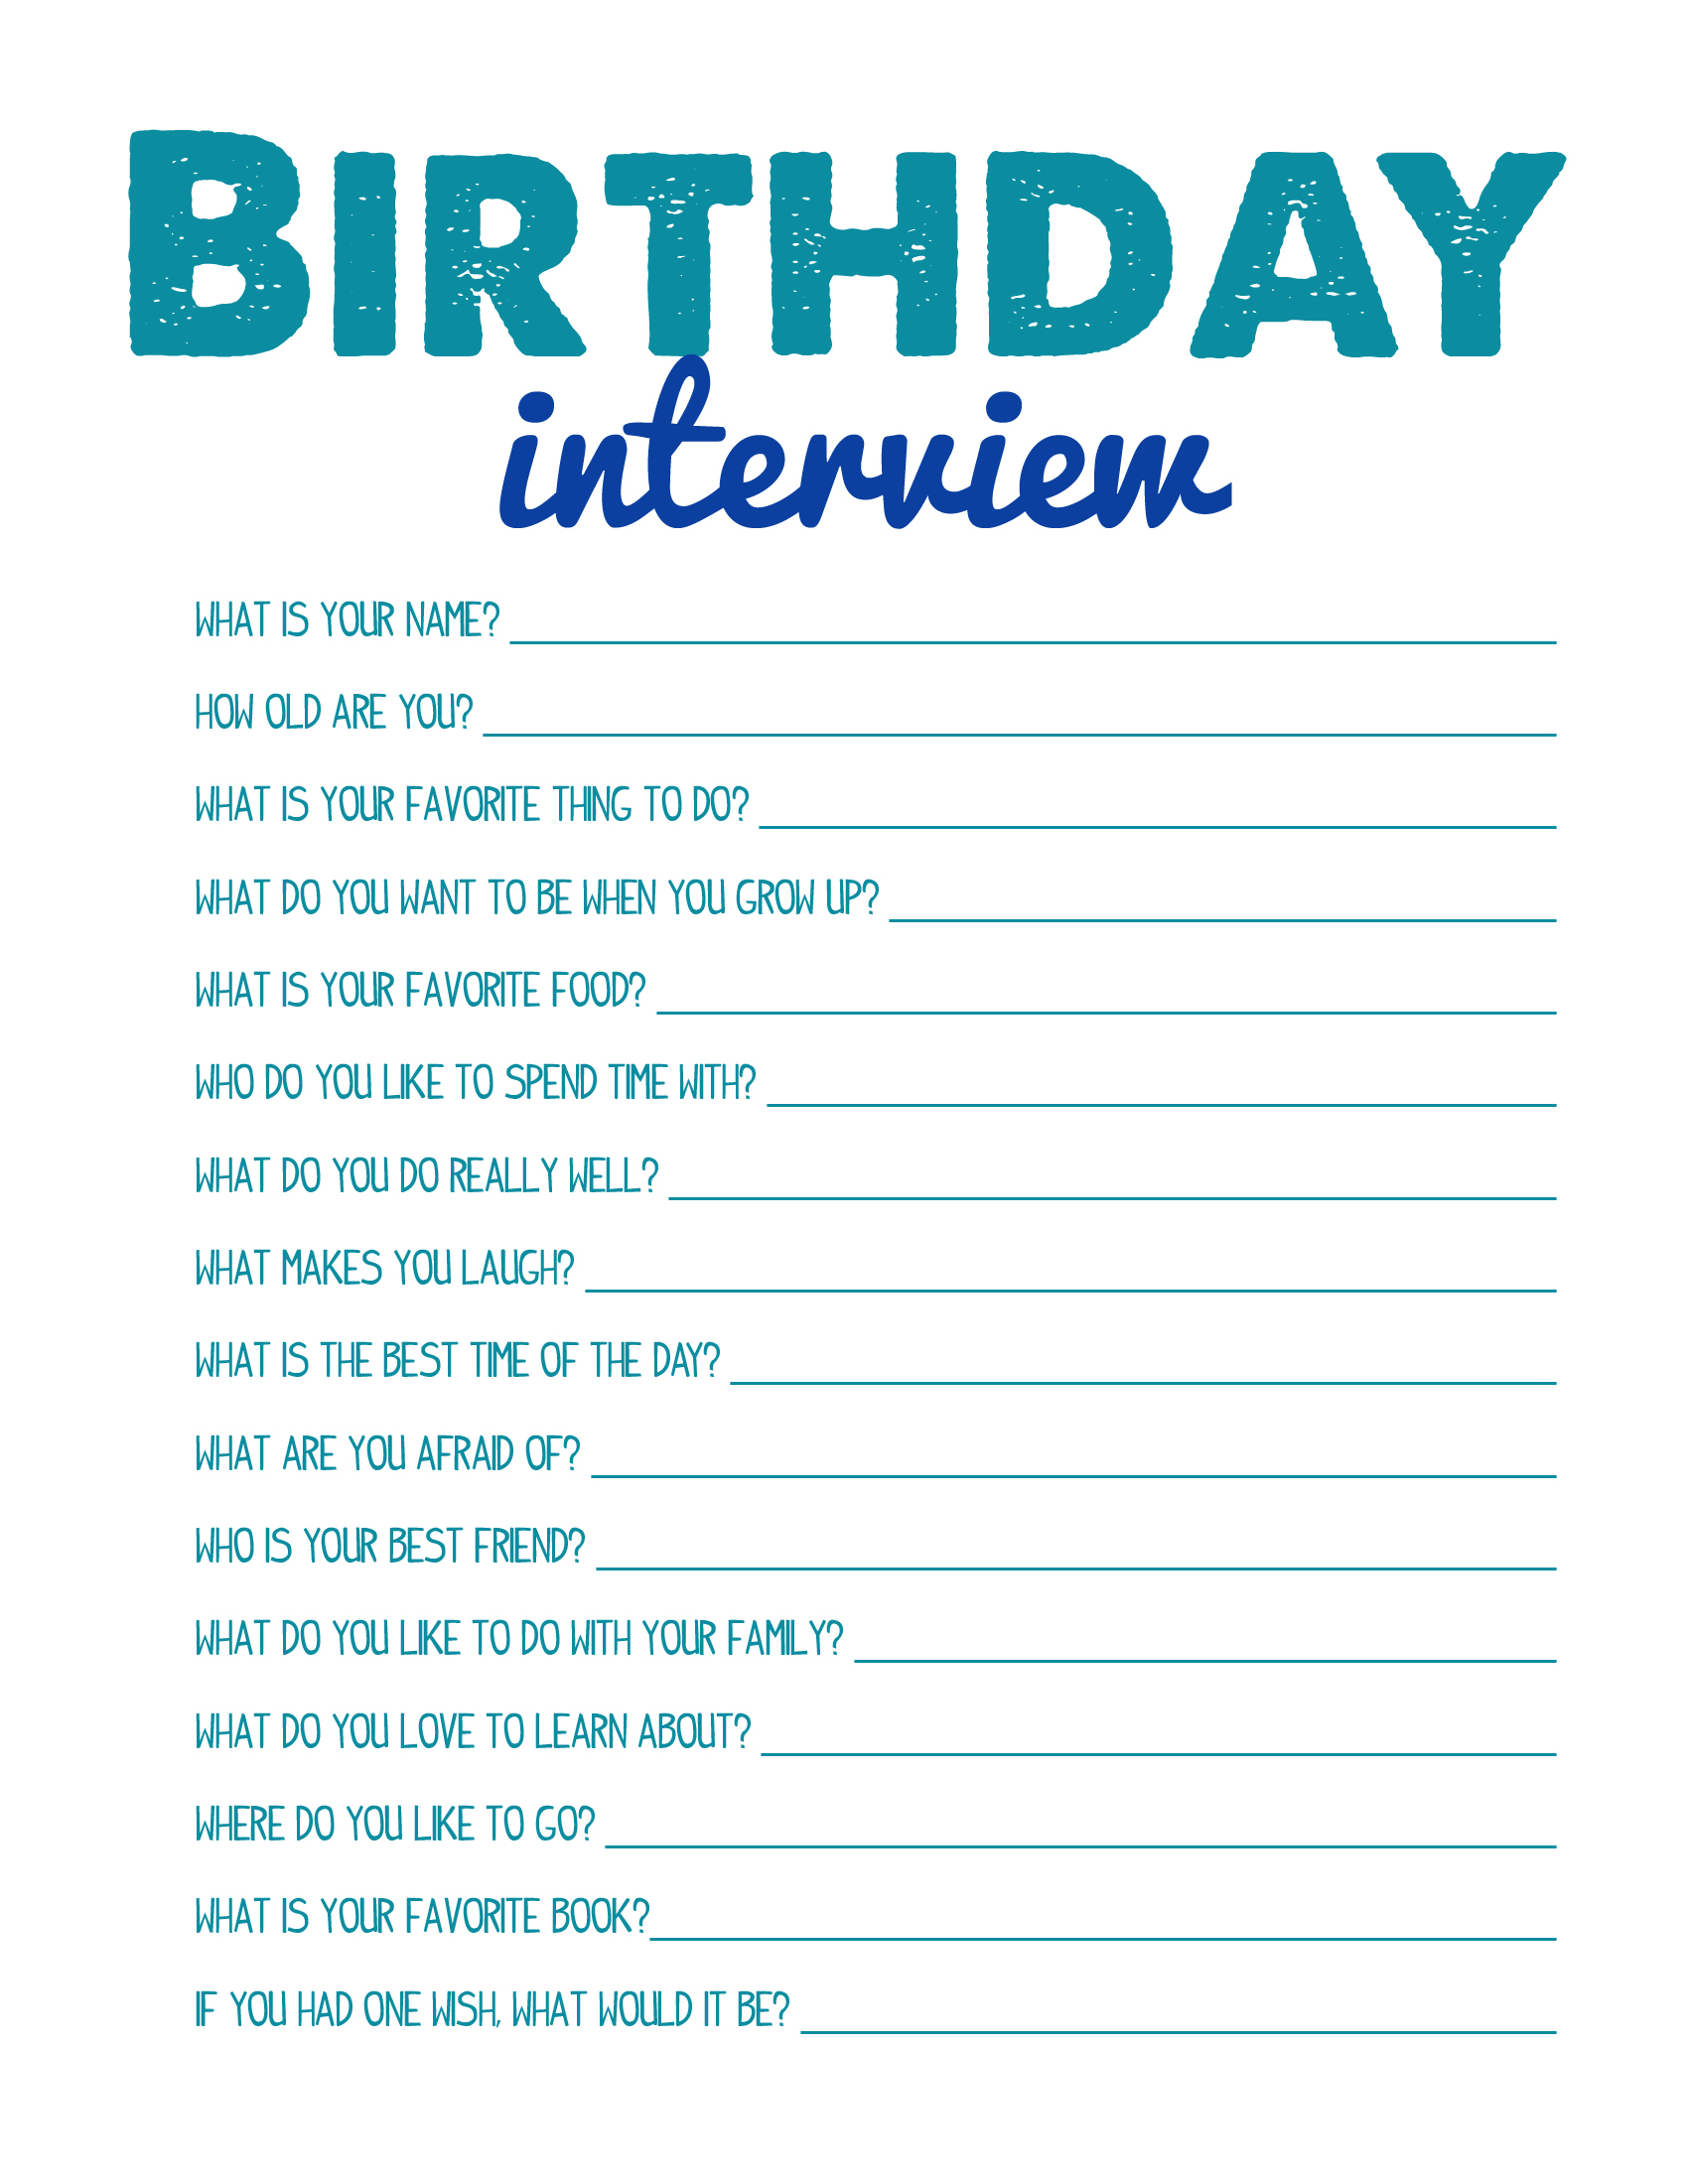 birthday-printable-images-gallery-category-page-10-printablee